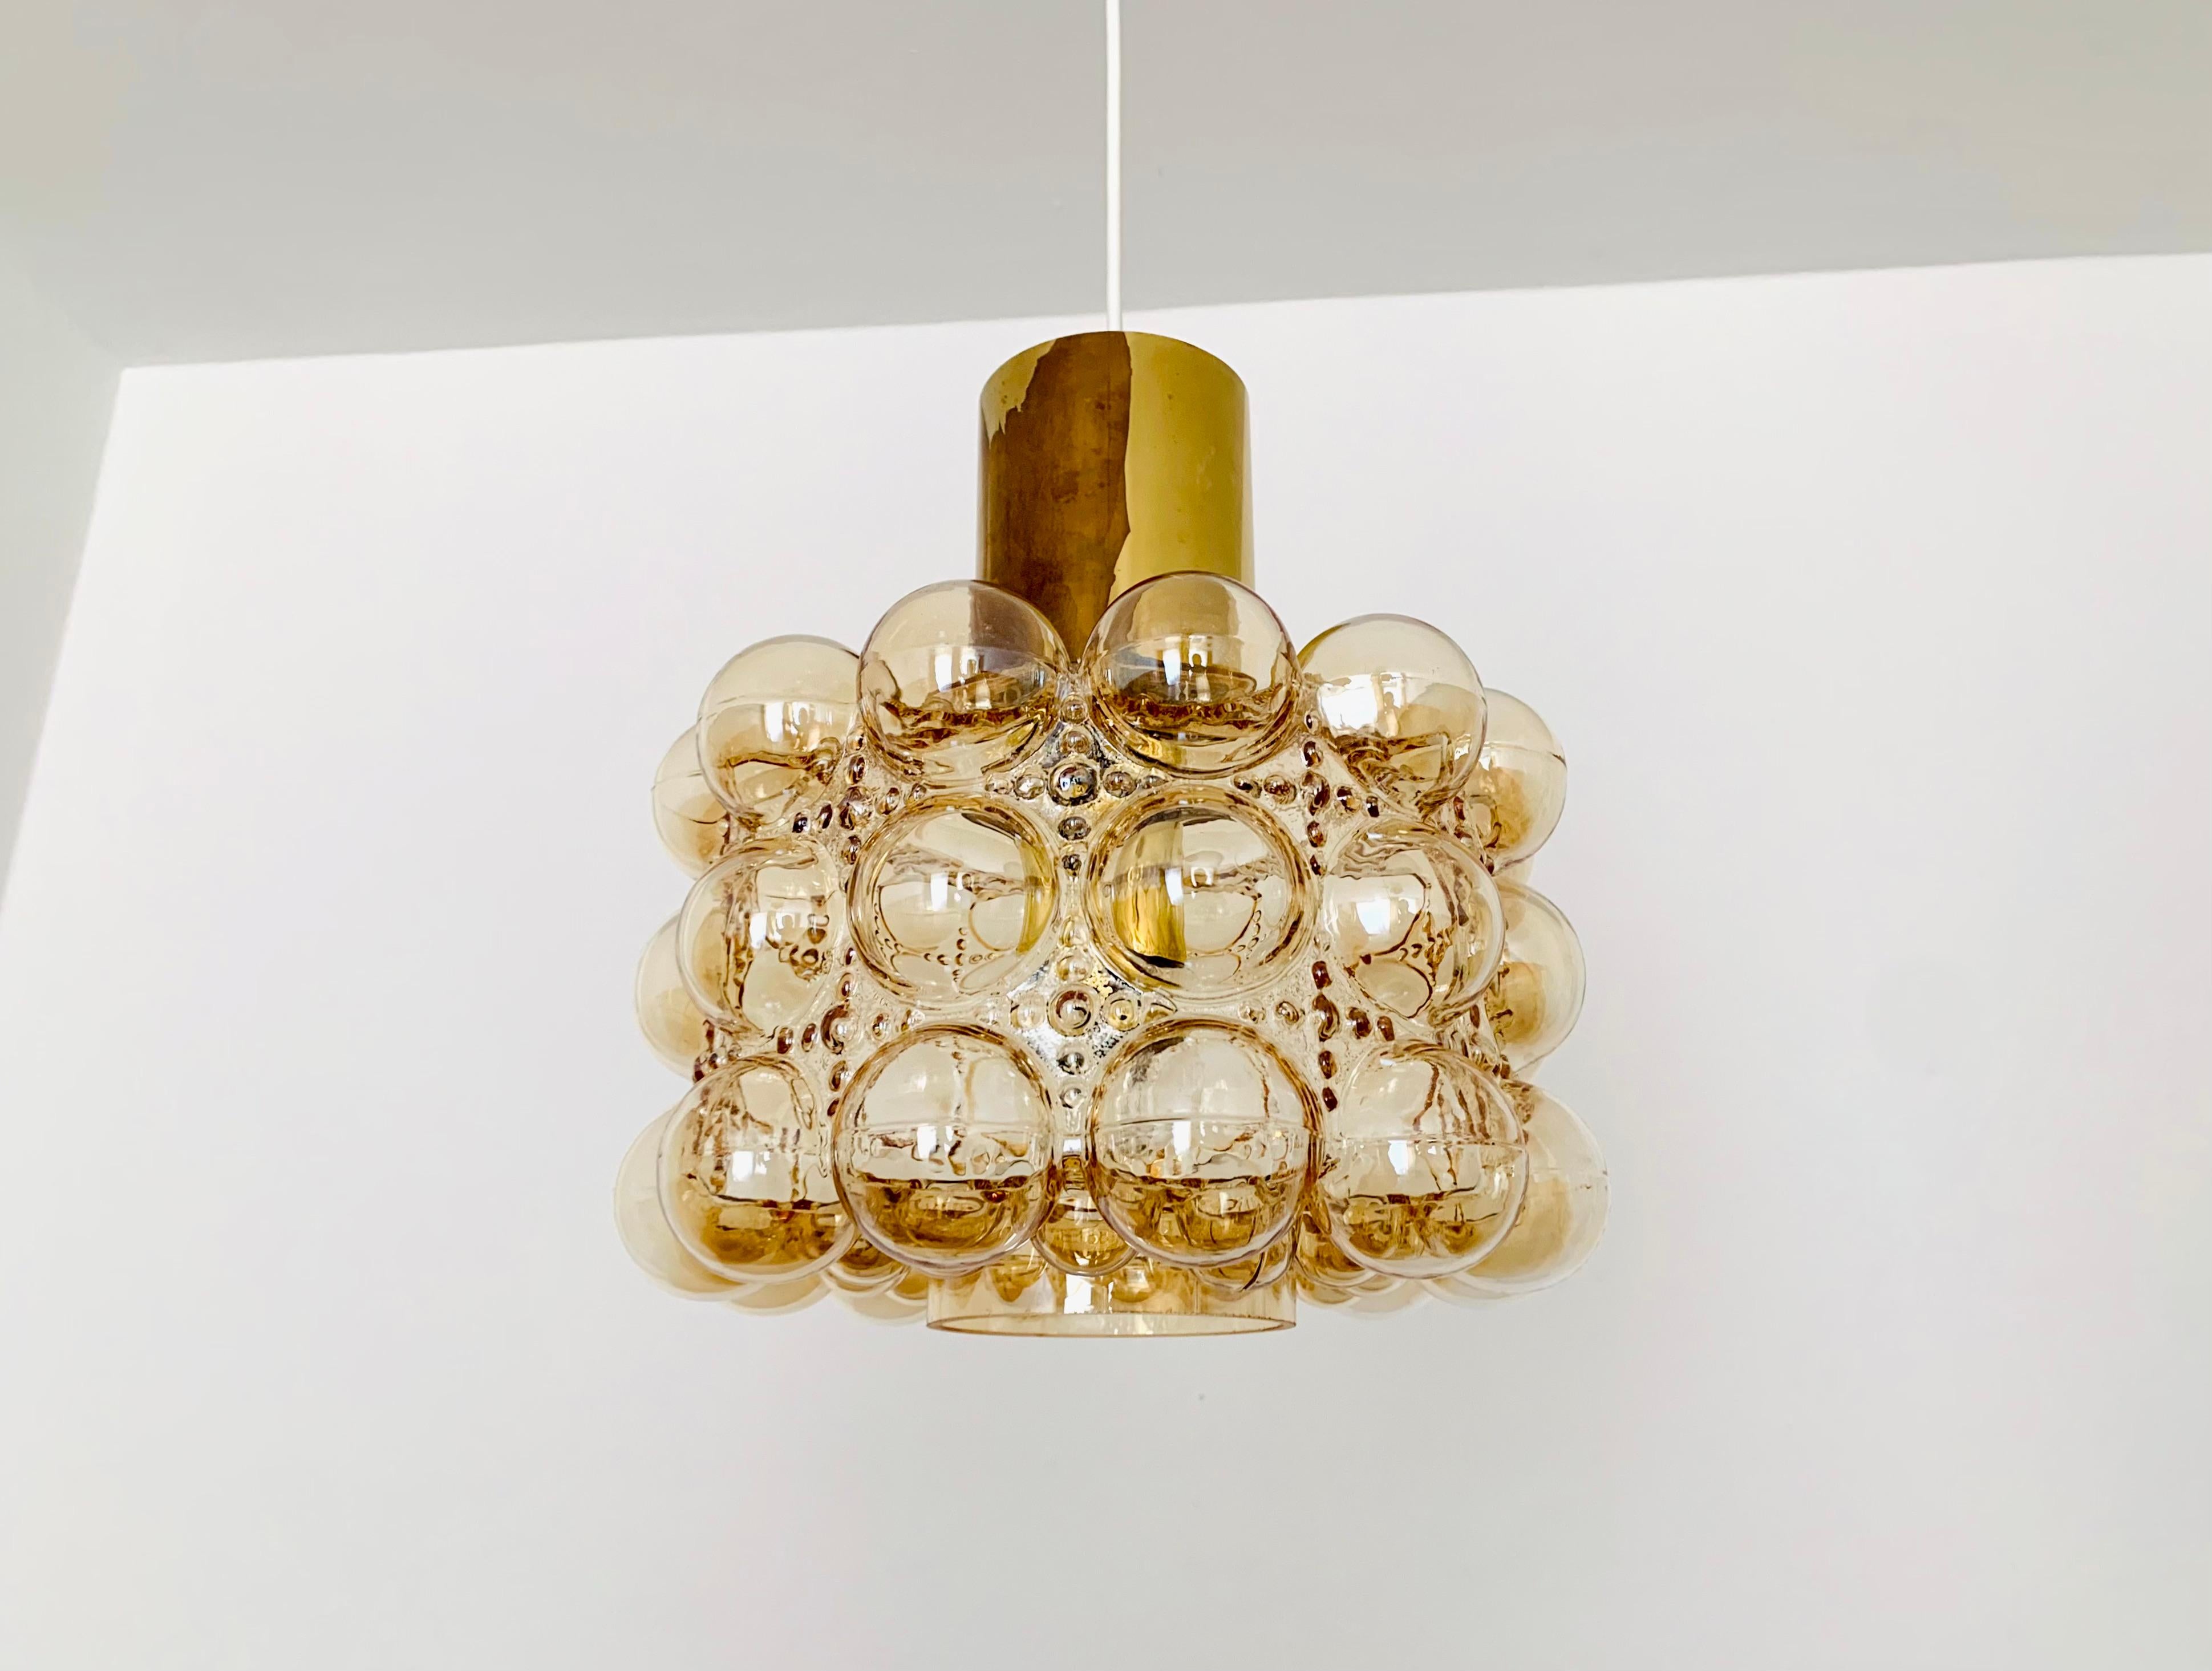 Very beautiful and large bubble glass pendant lamp by Helena Tynell for the Limburg glassworks.
The lamp spreads a spectacular play of light in the room and enchants with its charisma.
Great high-quality workmanship and extraordinary